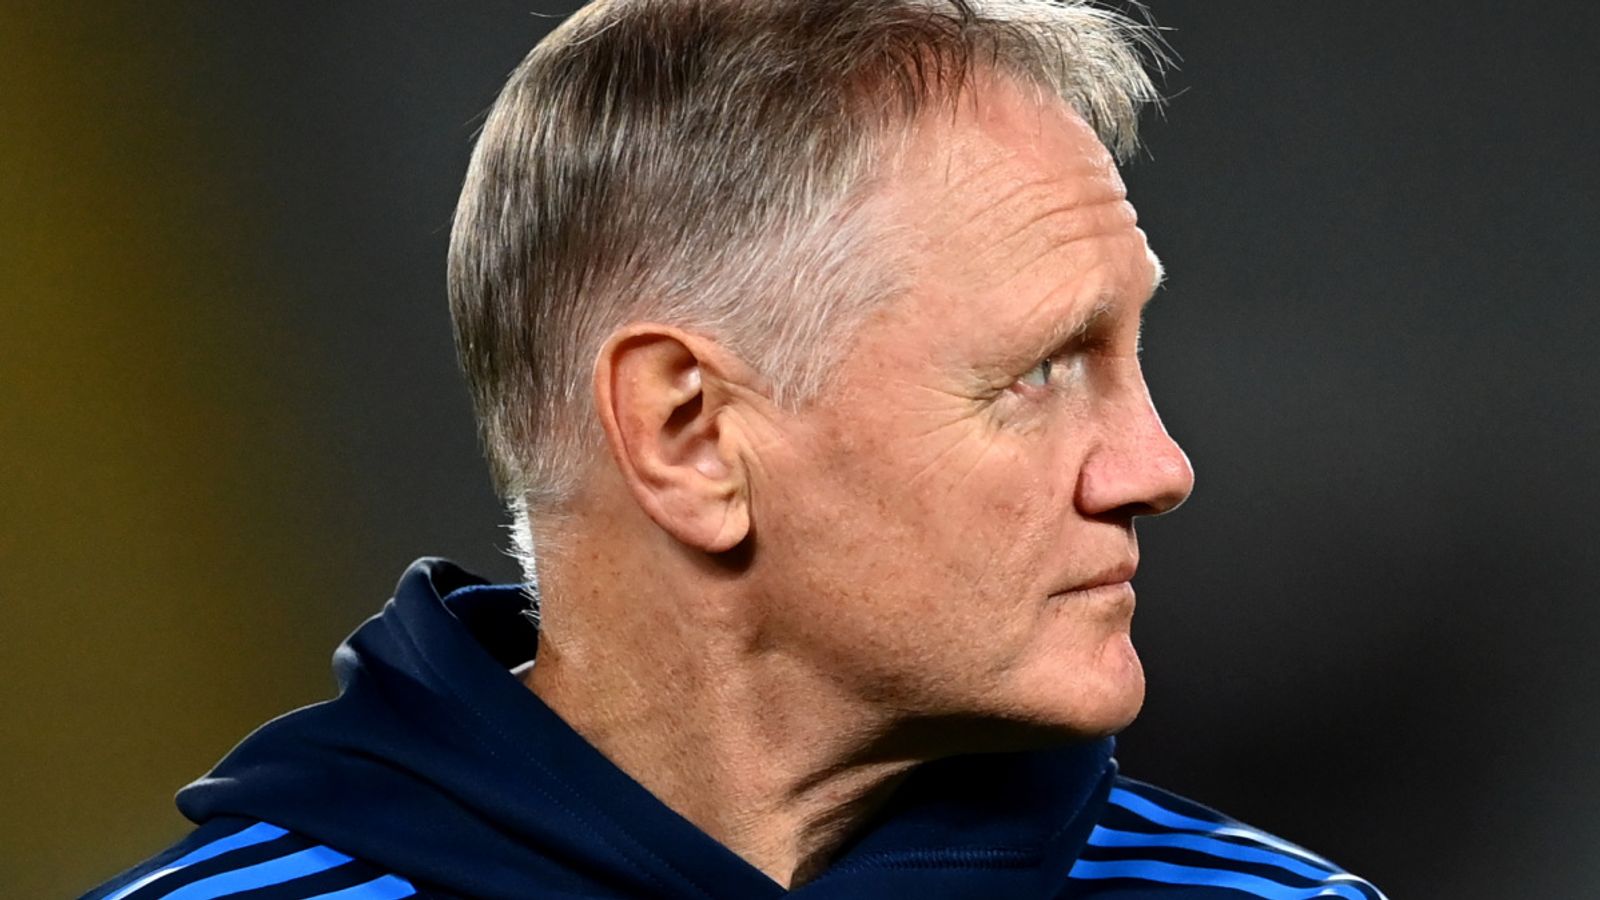 Joe Schmidt joins New Zealand coaching set-up early after Covid cases ahead of Ireland series